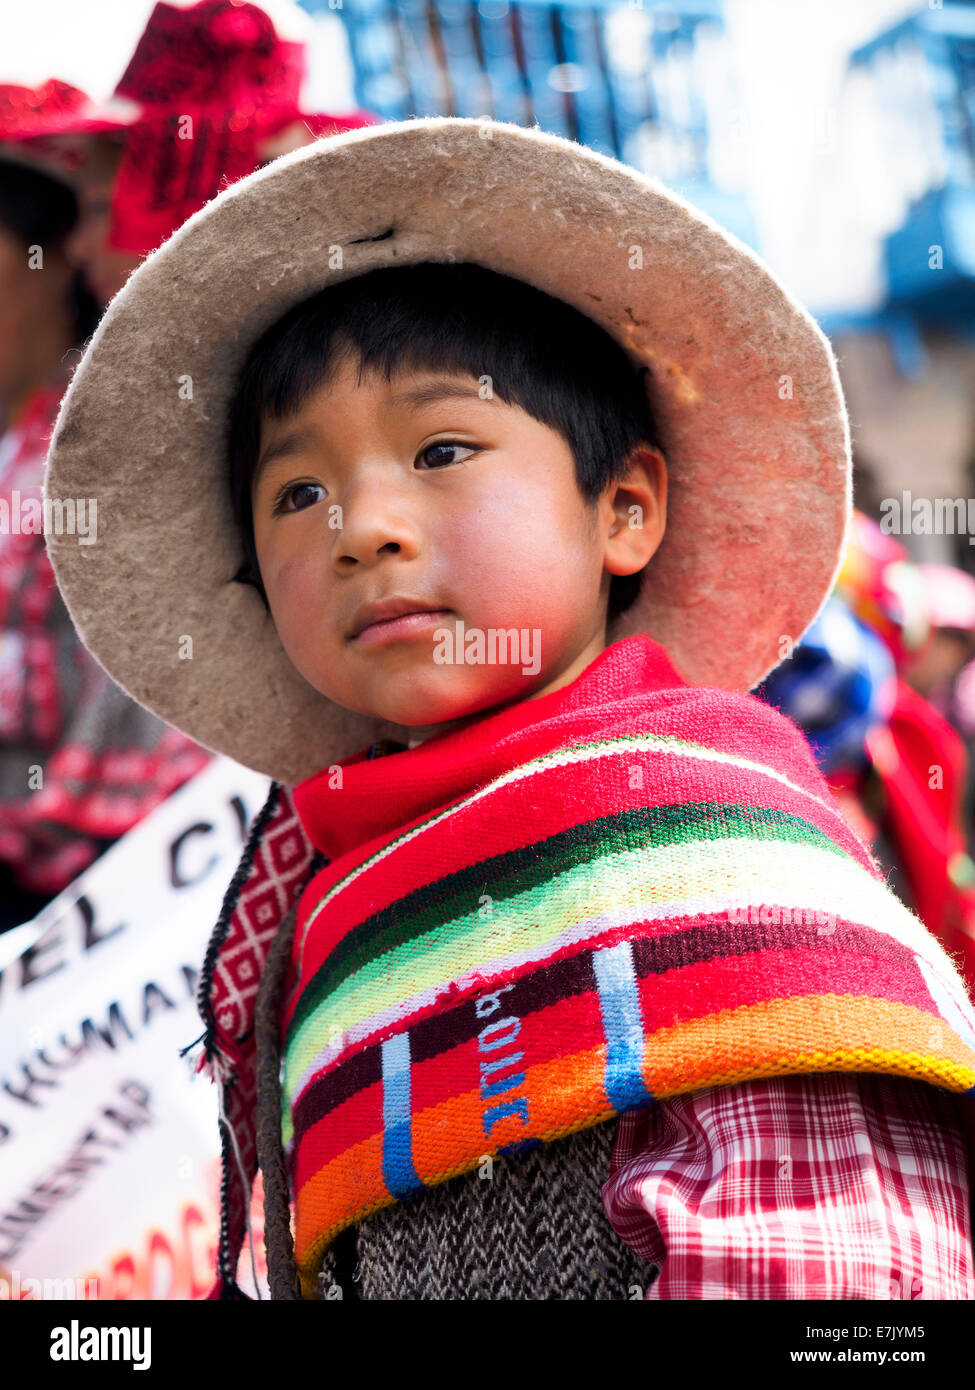 Local child at the Cusco Week festivites held each year in June leading up to the Inti Raymi festival - Cusco, Peru Stock Photo